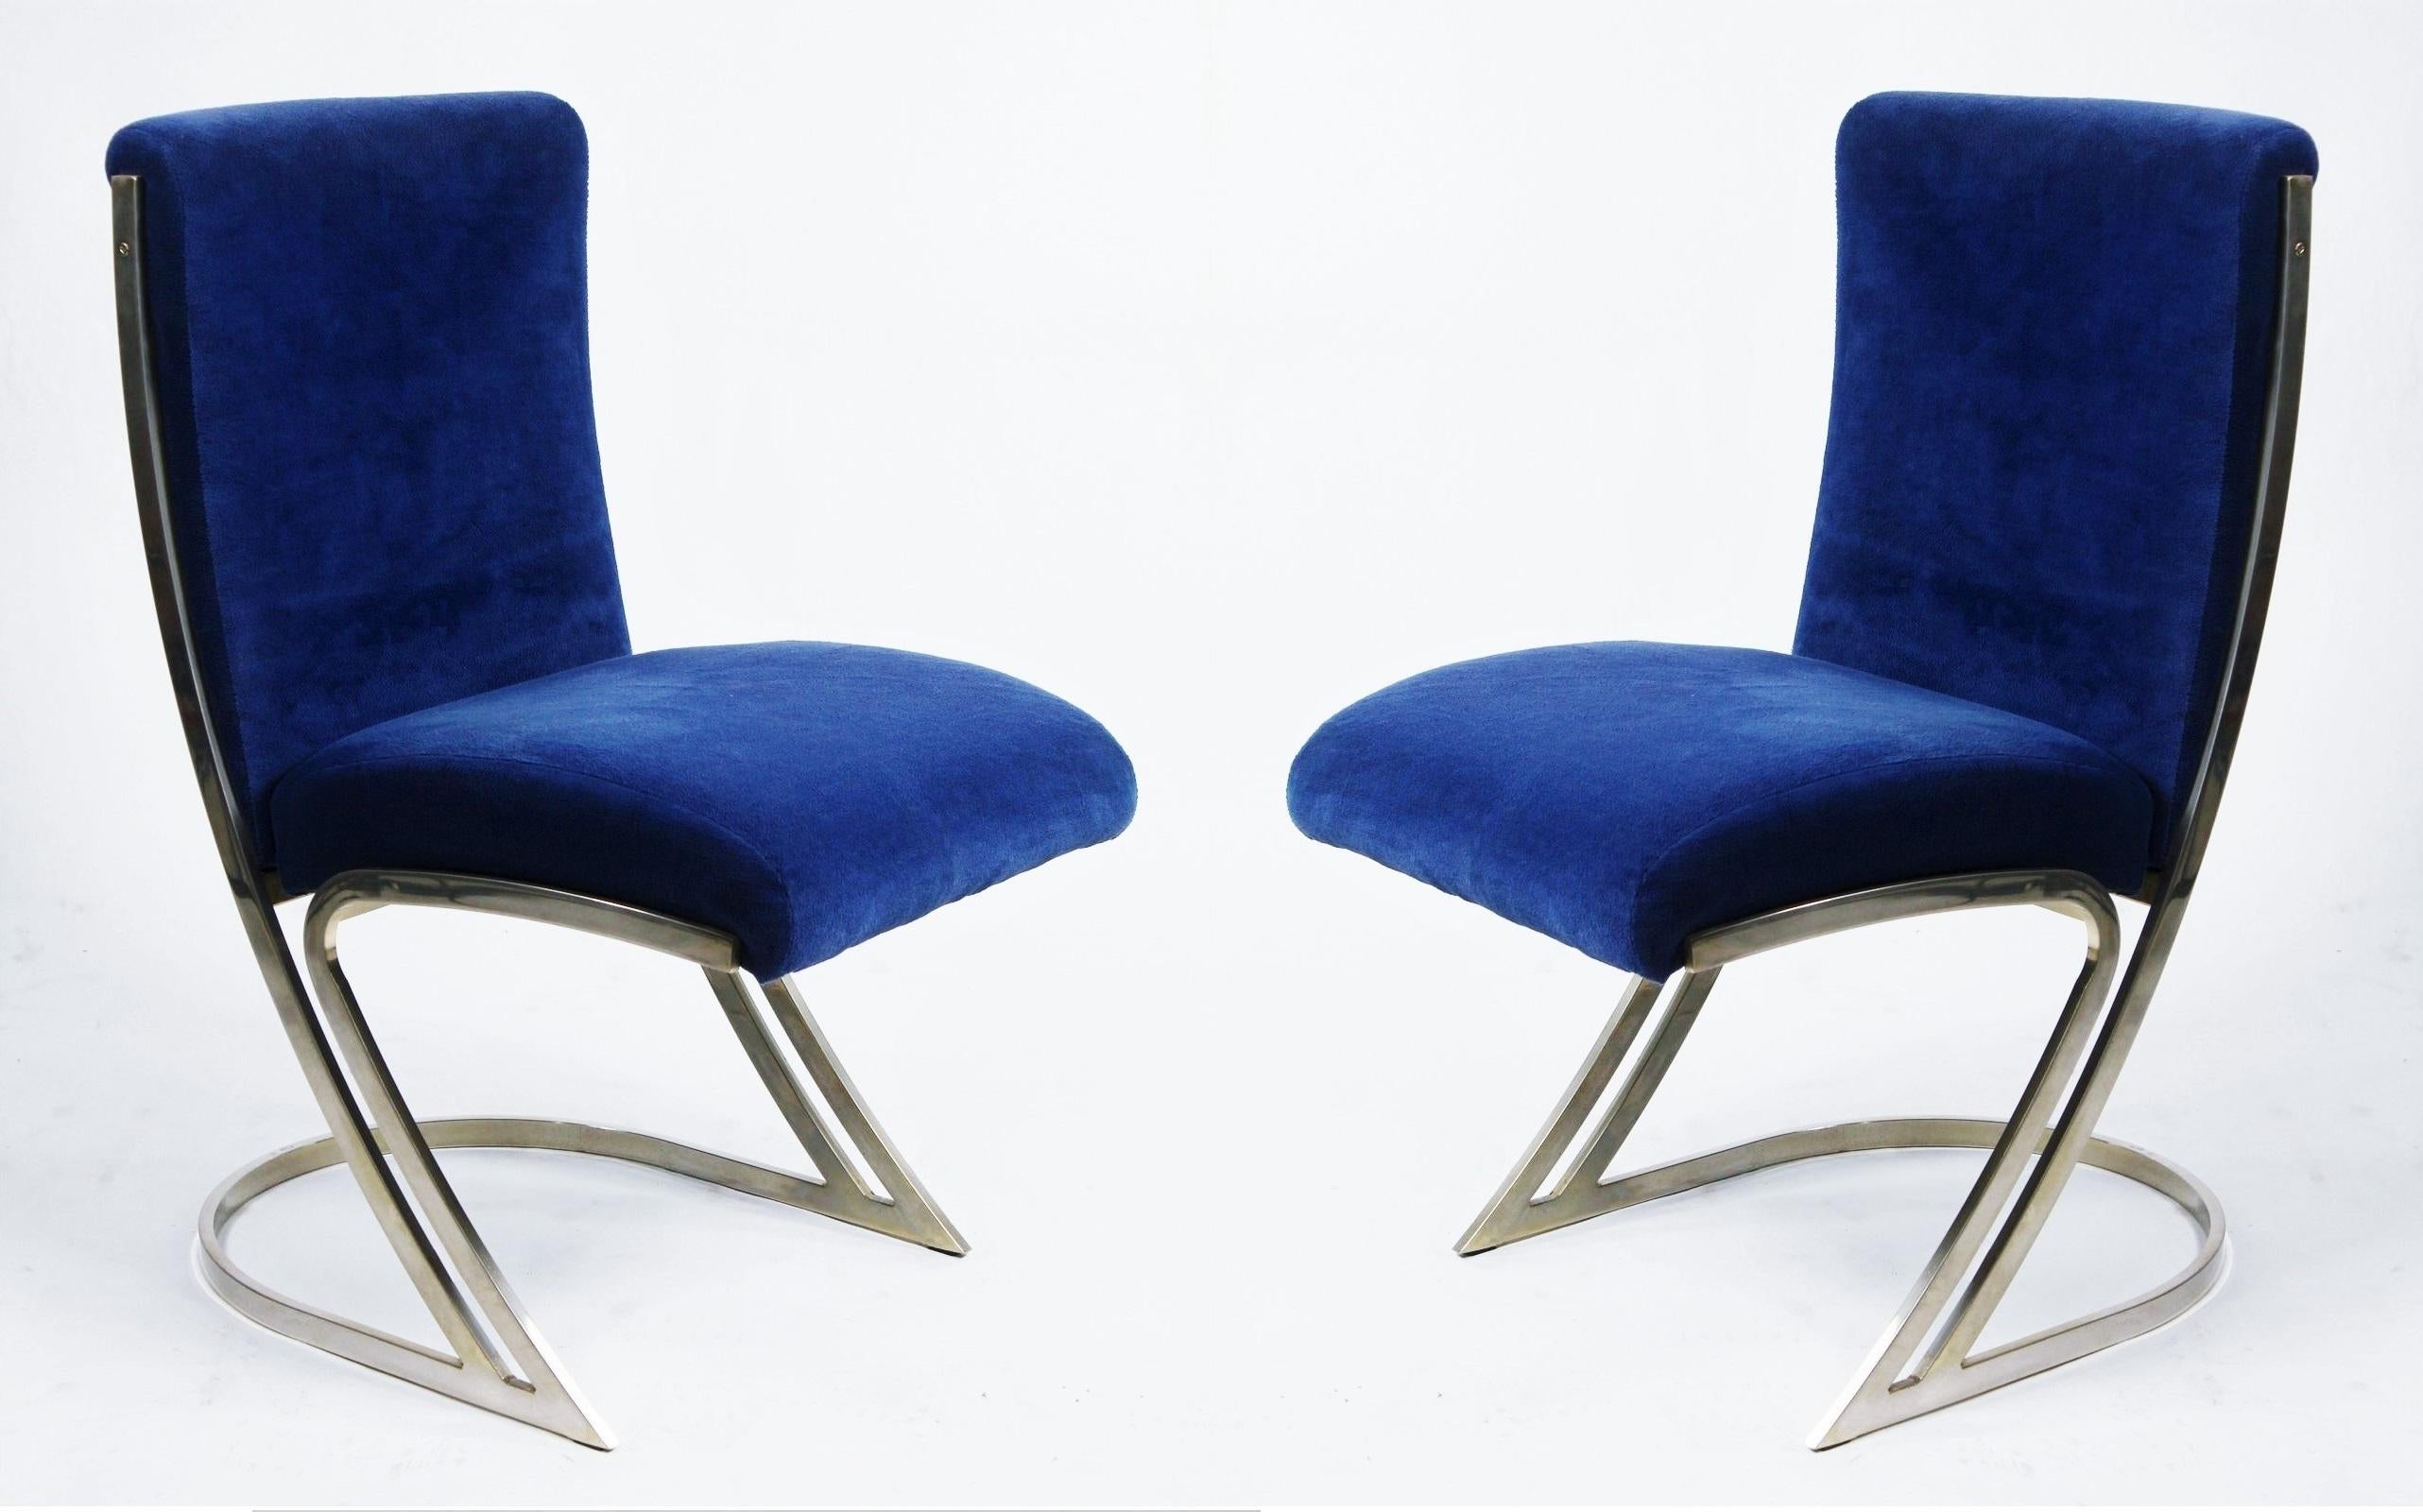 A stunning set of six Mid-Century Modern/ Regency styled Pierre Cardin design, dining chairs. Featuring plush cushioned new blue velvet upholstery supported by a sculptural cantilevered 